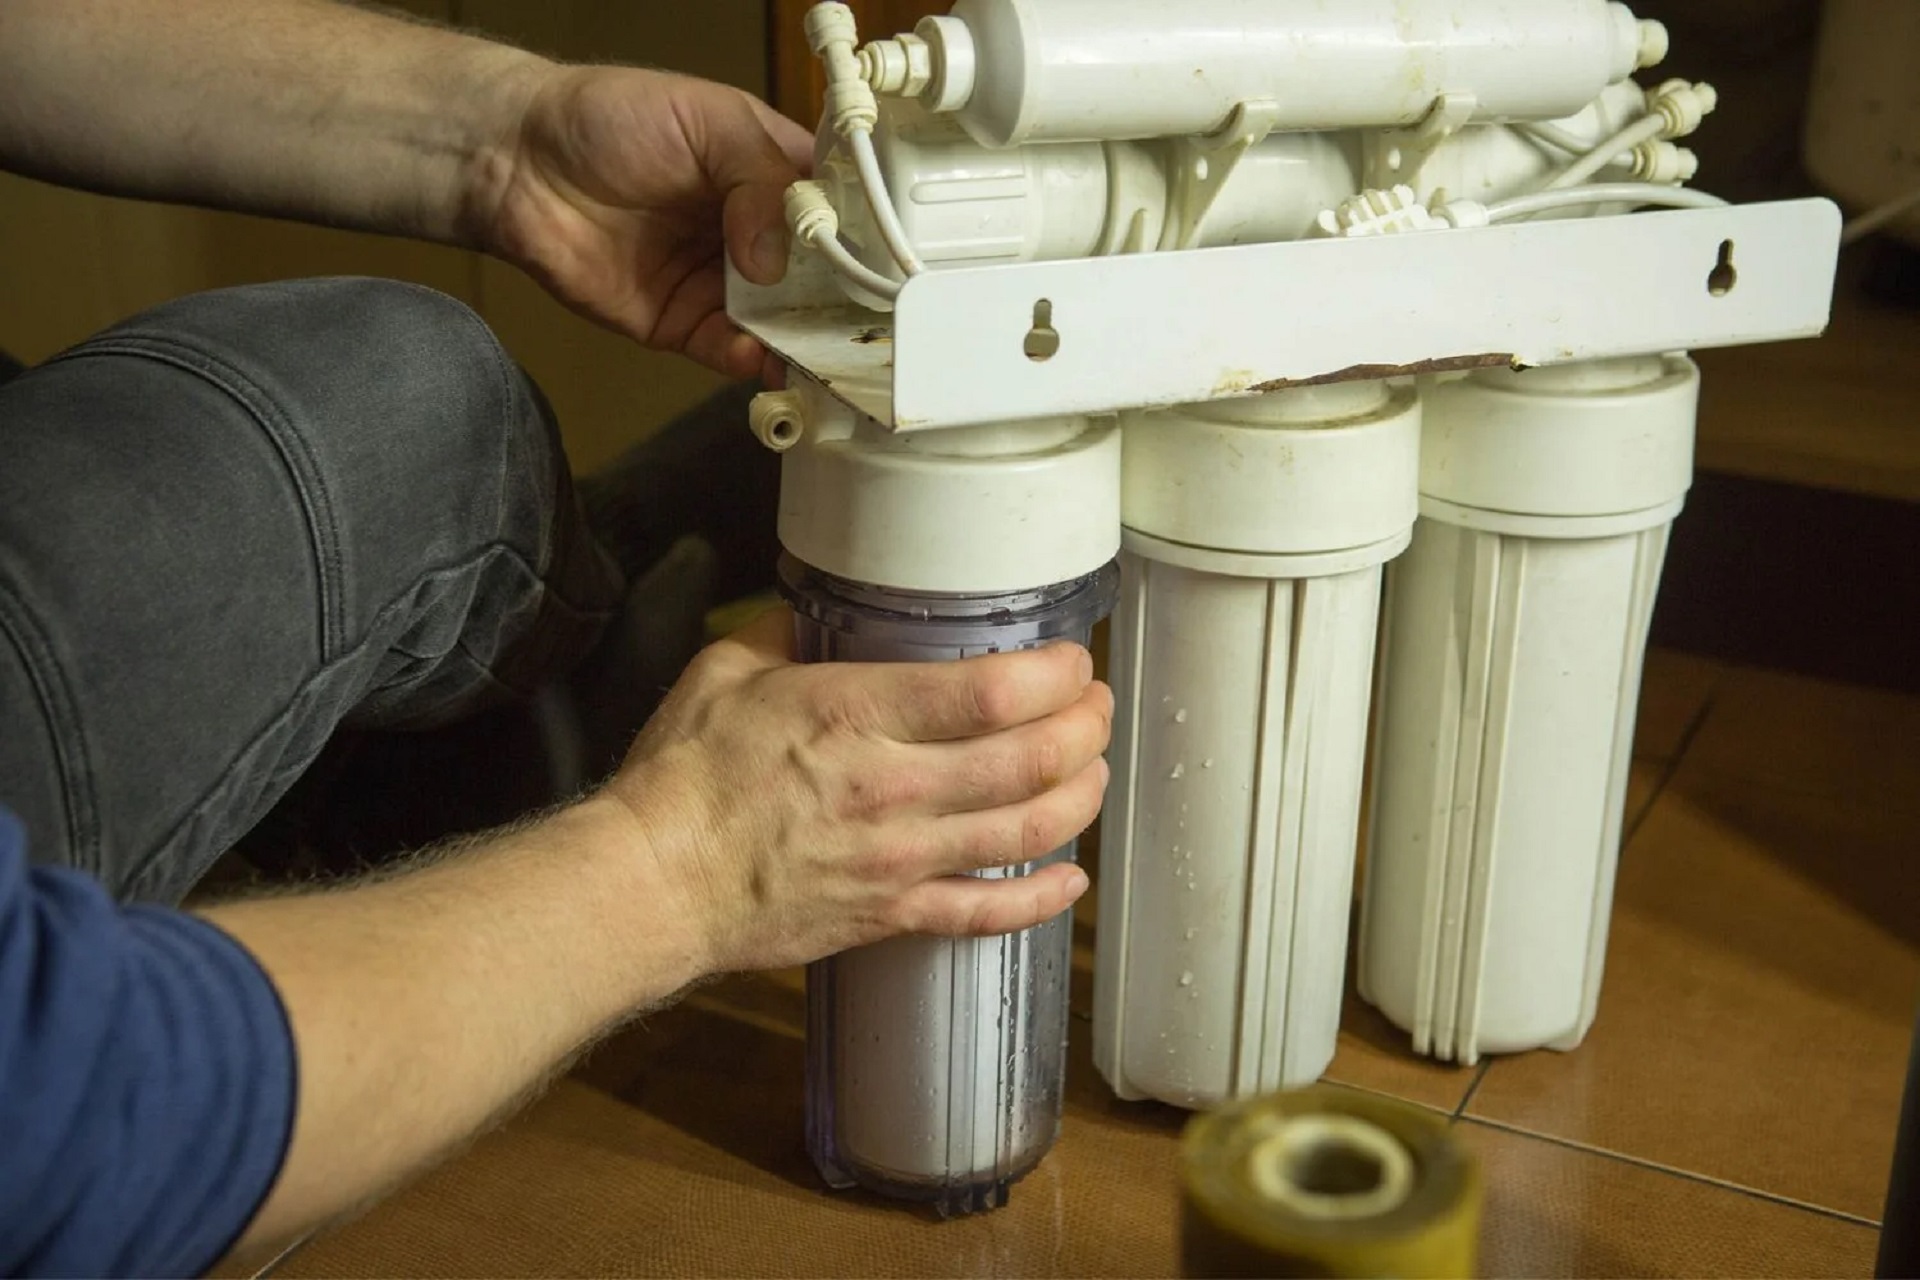 How To Install Under Sink Water Filter In 9 Simple Steps